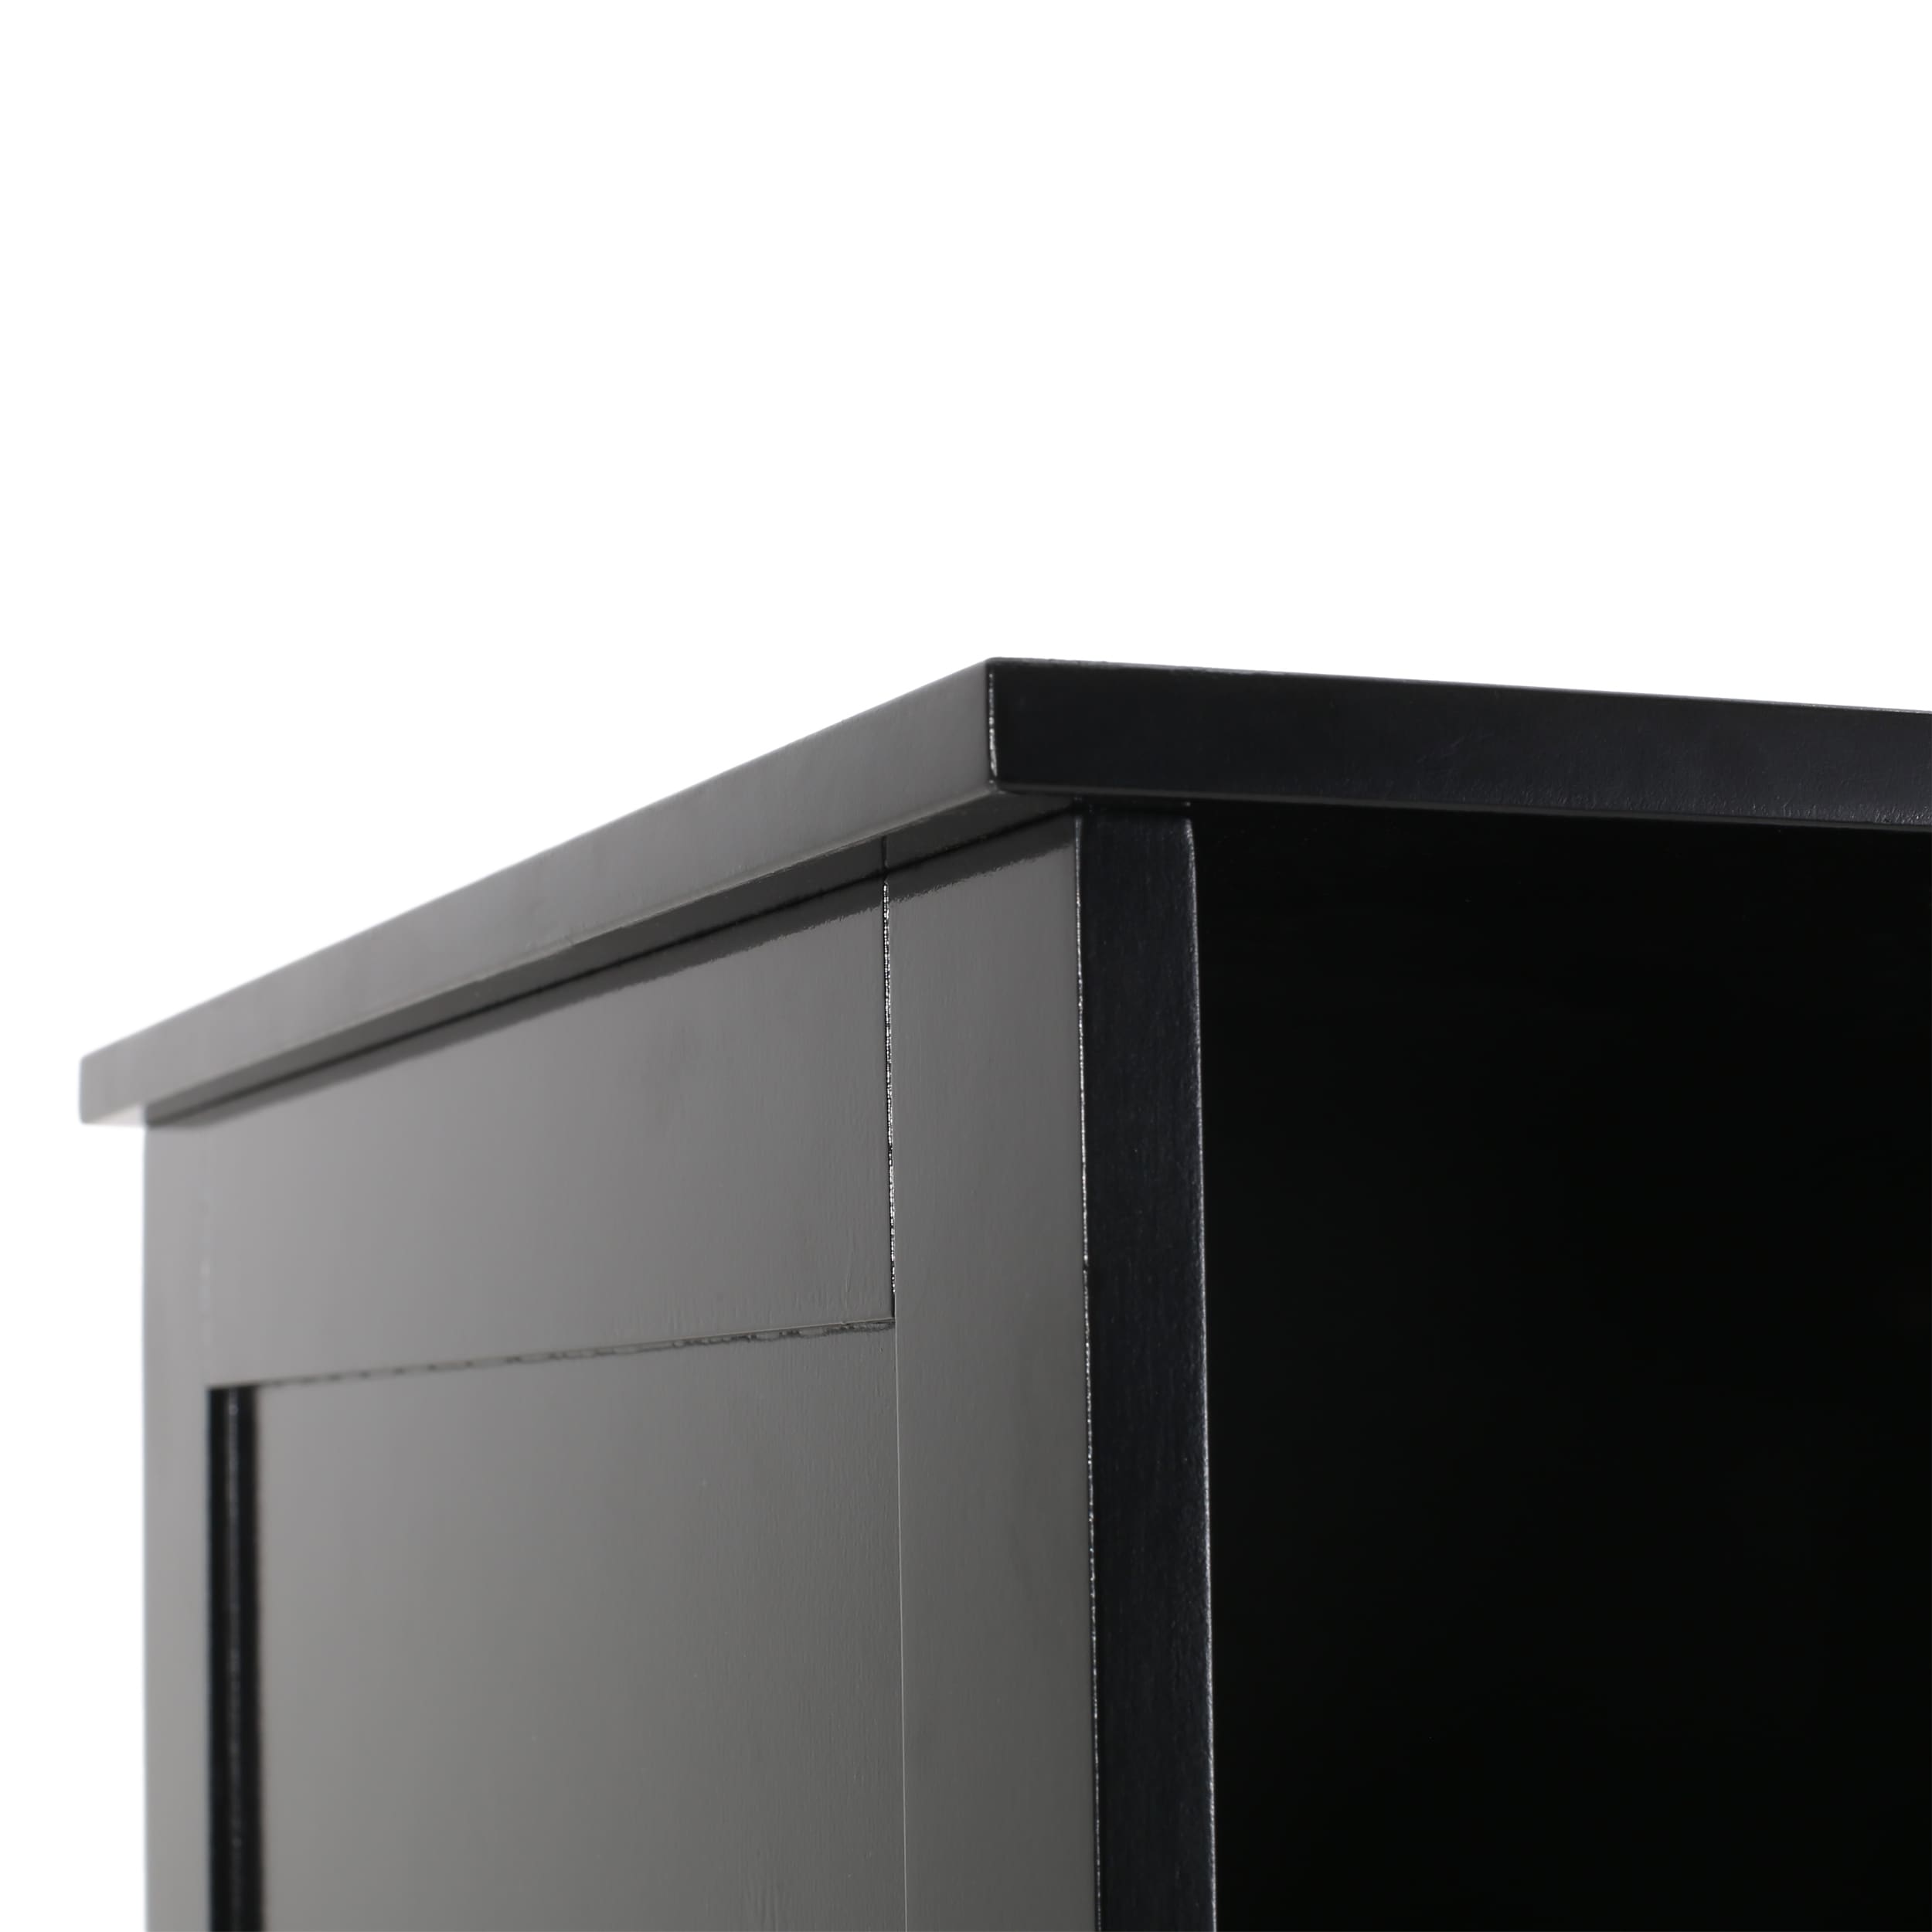 https://ak1.ostkcdn.com/images/products/is/images/direct/906e35ebfb052813a6a248cc5d2726433db6ee5f/Heineberg-Modern-Free-Standing-Bathroom-Linen-Tower-Storage-Cabinet-by-Christopher-Knight-Home.jpg